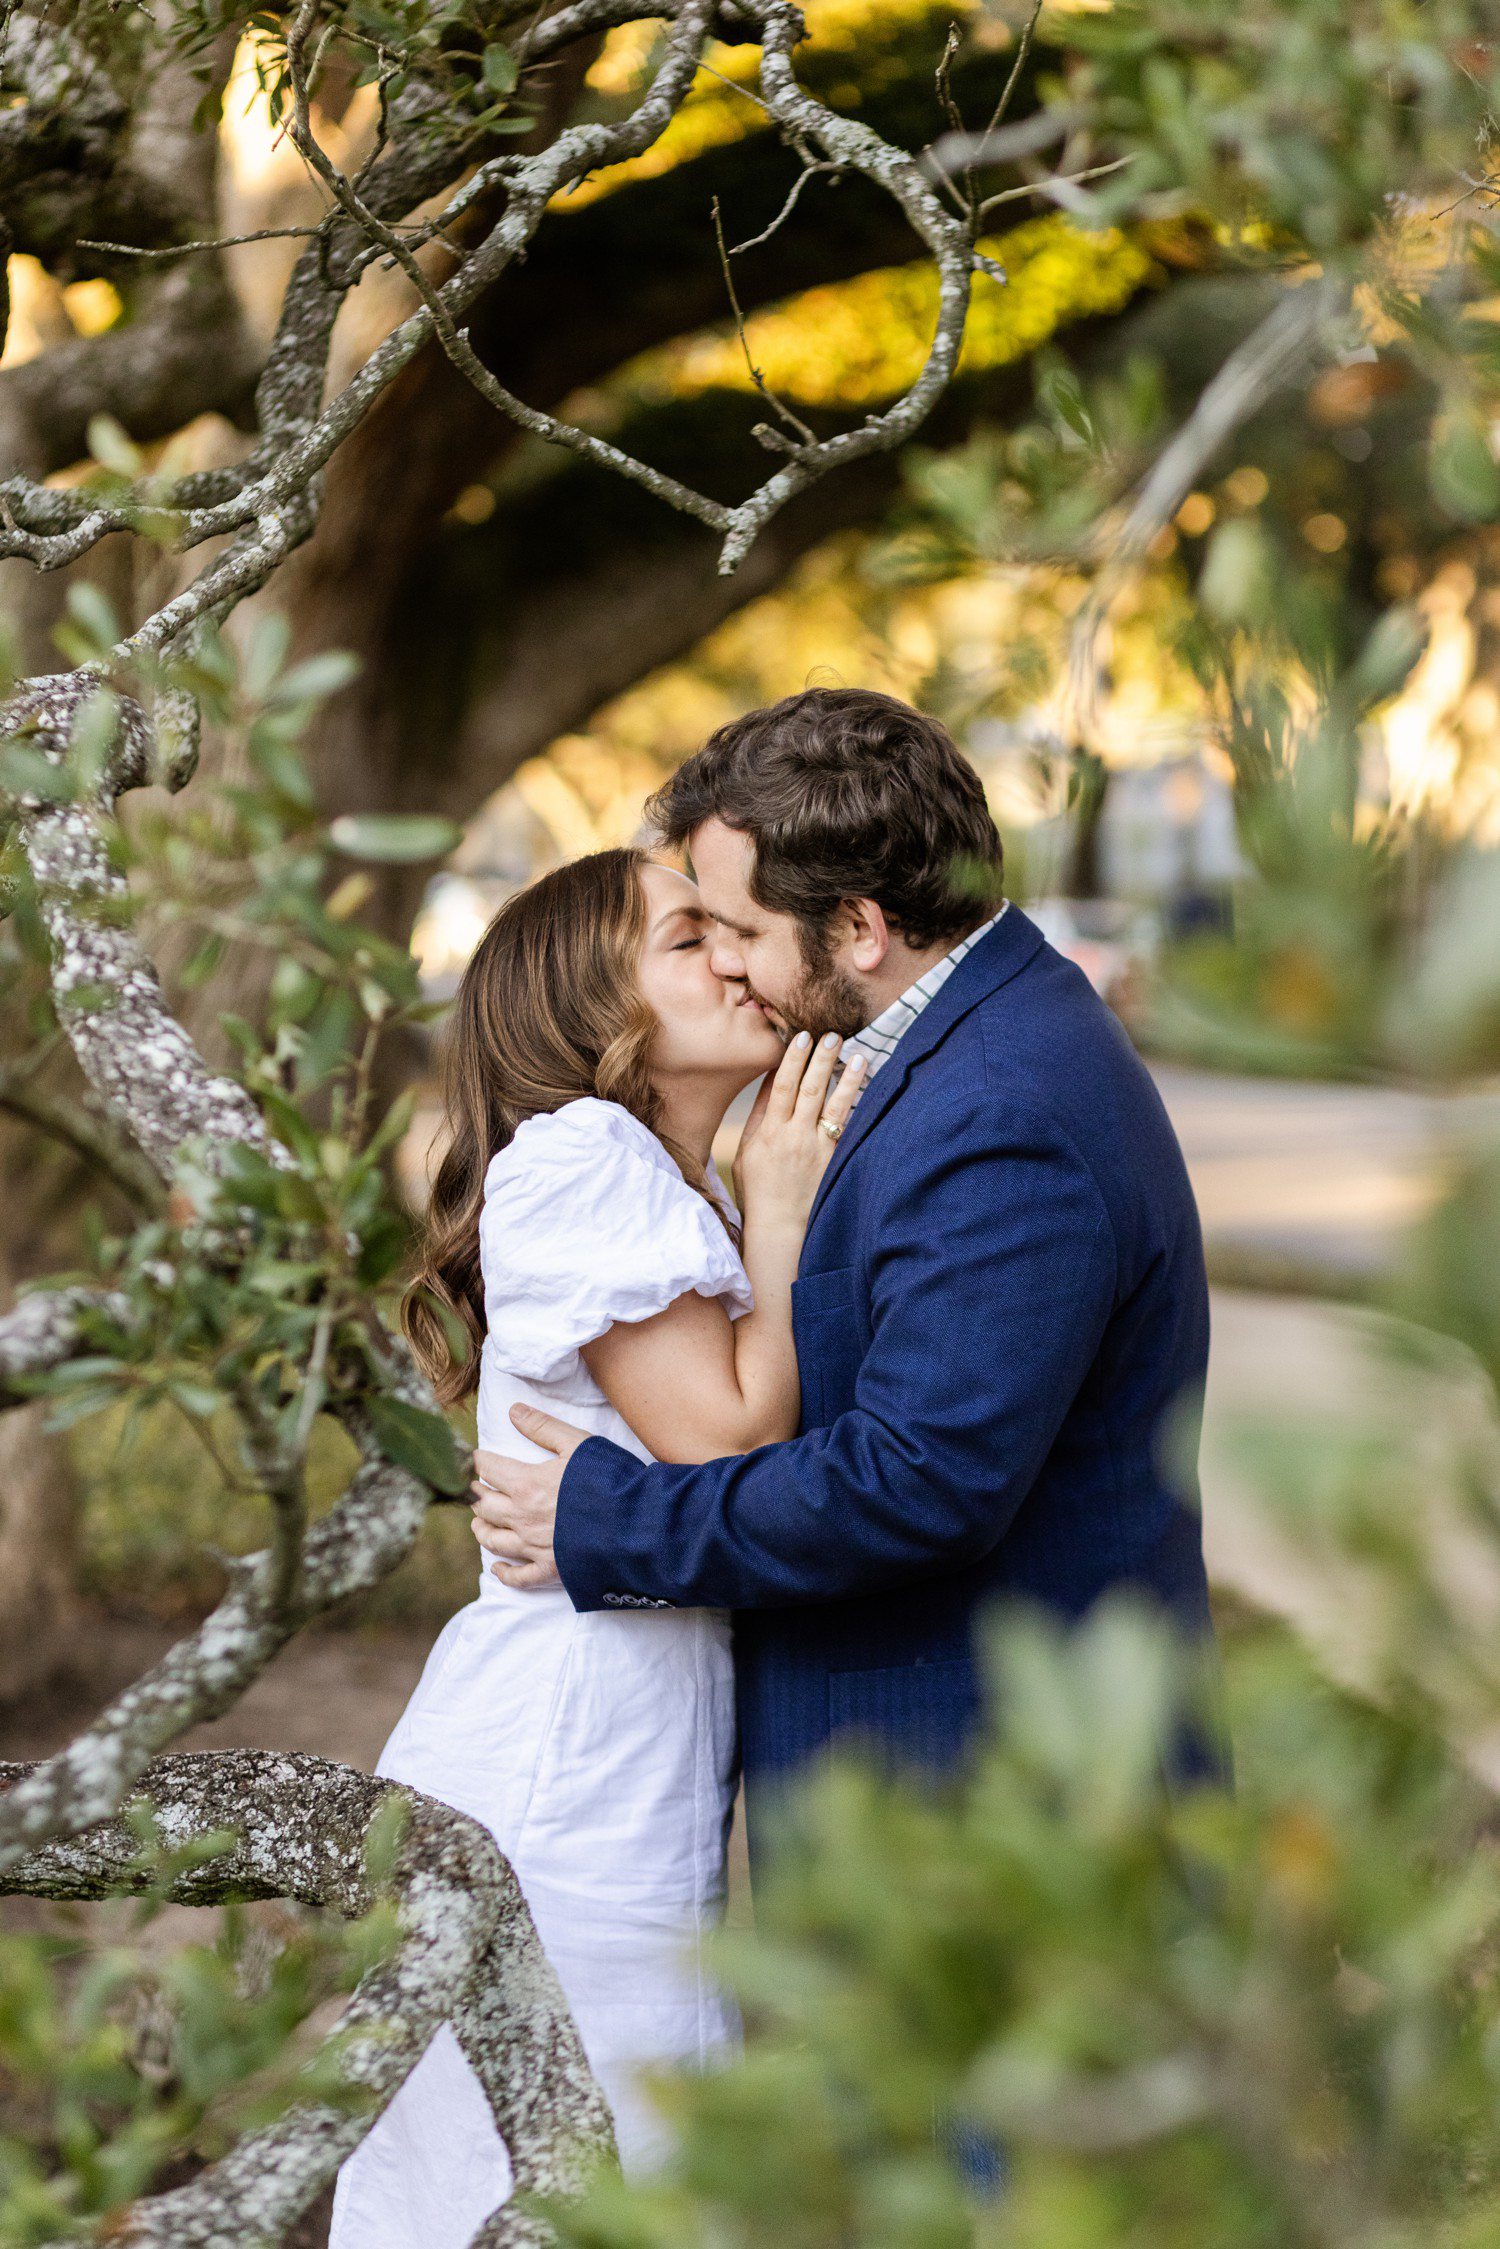 Houston Engagement Photos at the Menil Collection